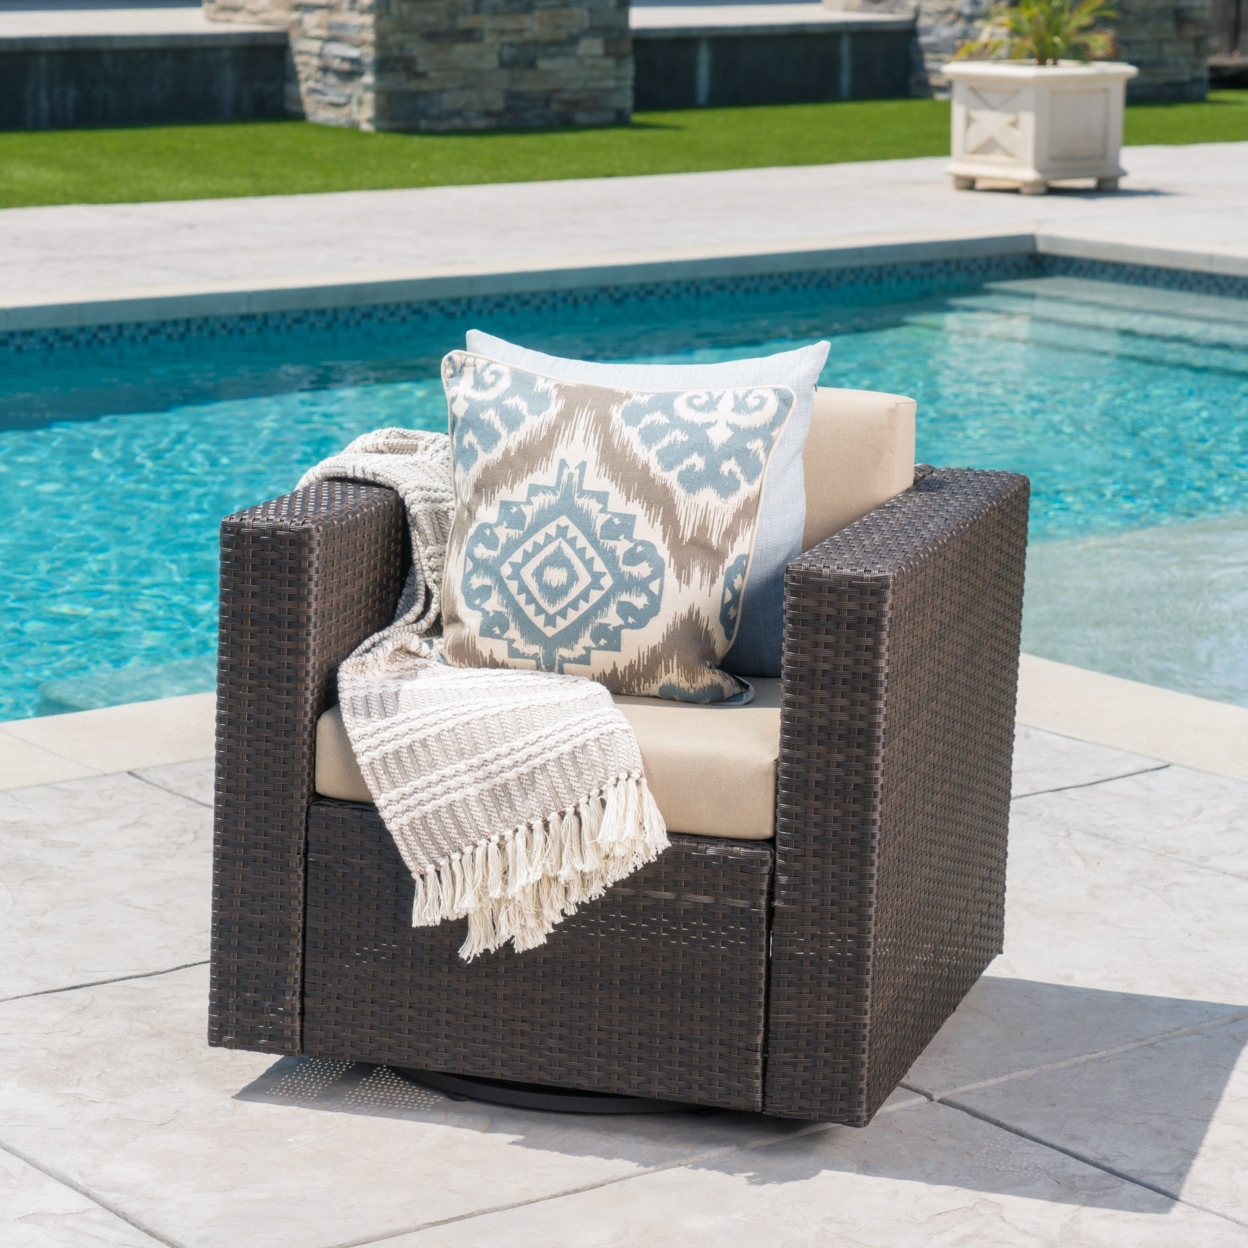 Venice Outdoor Wicker Swivel Club Chair With Water Resistant Cushions - Light Brown/ceramic Gray, Set Of 2